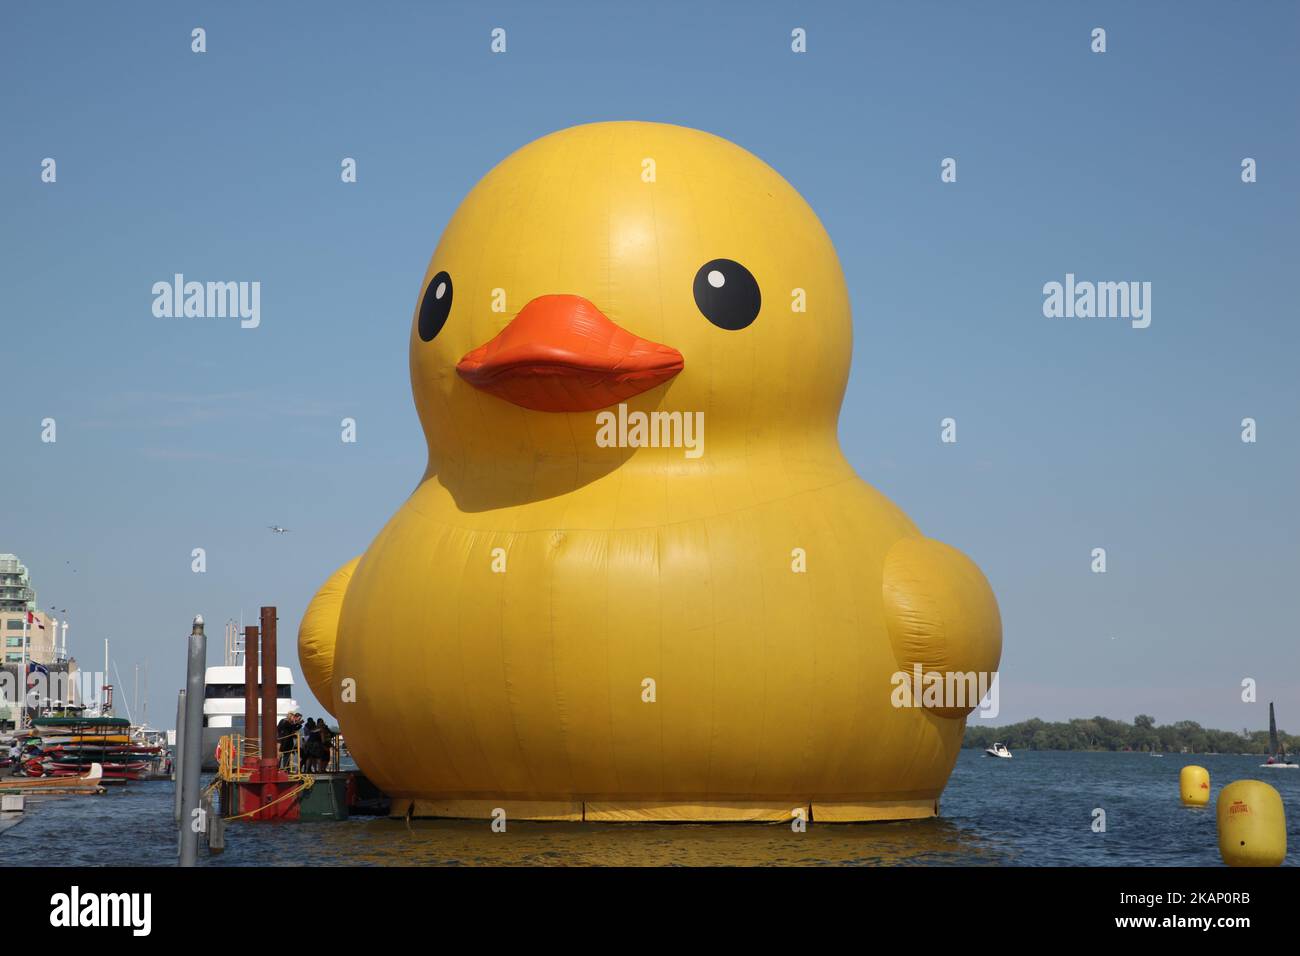 The world's largest rubber duck arrived in Toronto, Ontario, Canada, on June 30, 2017, in preparation for the upcoming celebrations for the 150th birthday of Canada. The 13,600-kg inflatable duck was created by Dutch artist Florentijn Hofman and is more than 27 meters in length and nearly six storeys tall. The giant rubber duck will tour through Ontario as part of the Redpath Waterfront Festival. The 150th anniversary of Canada (the 150th anniversary of Confederation) will take place on July 1, 2017, with many celebrations planned across the country. (Photo by Creative Touch Imaging Ltd./NurPh Stock Photo